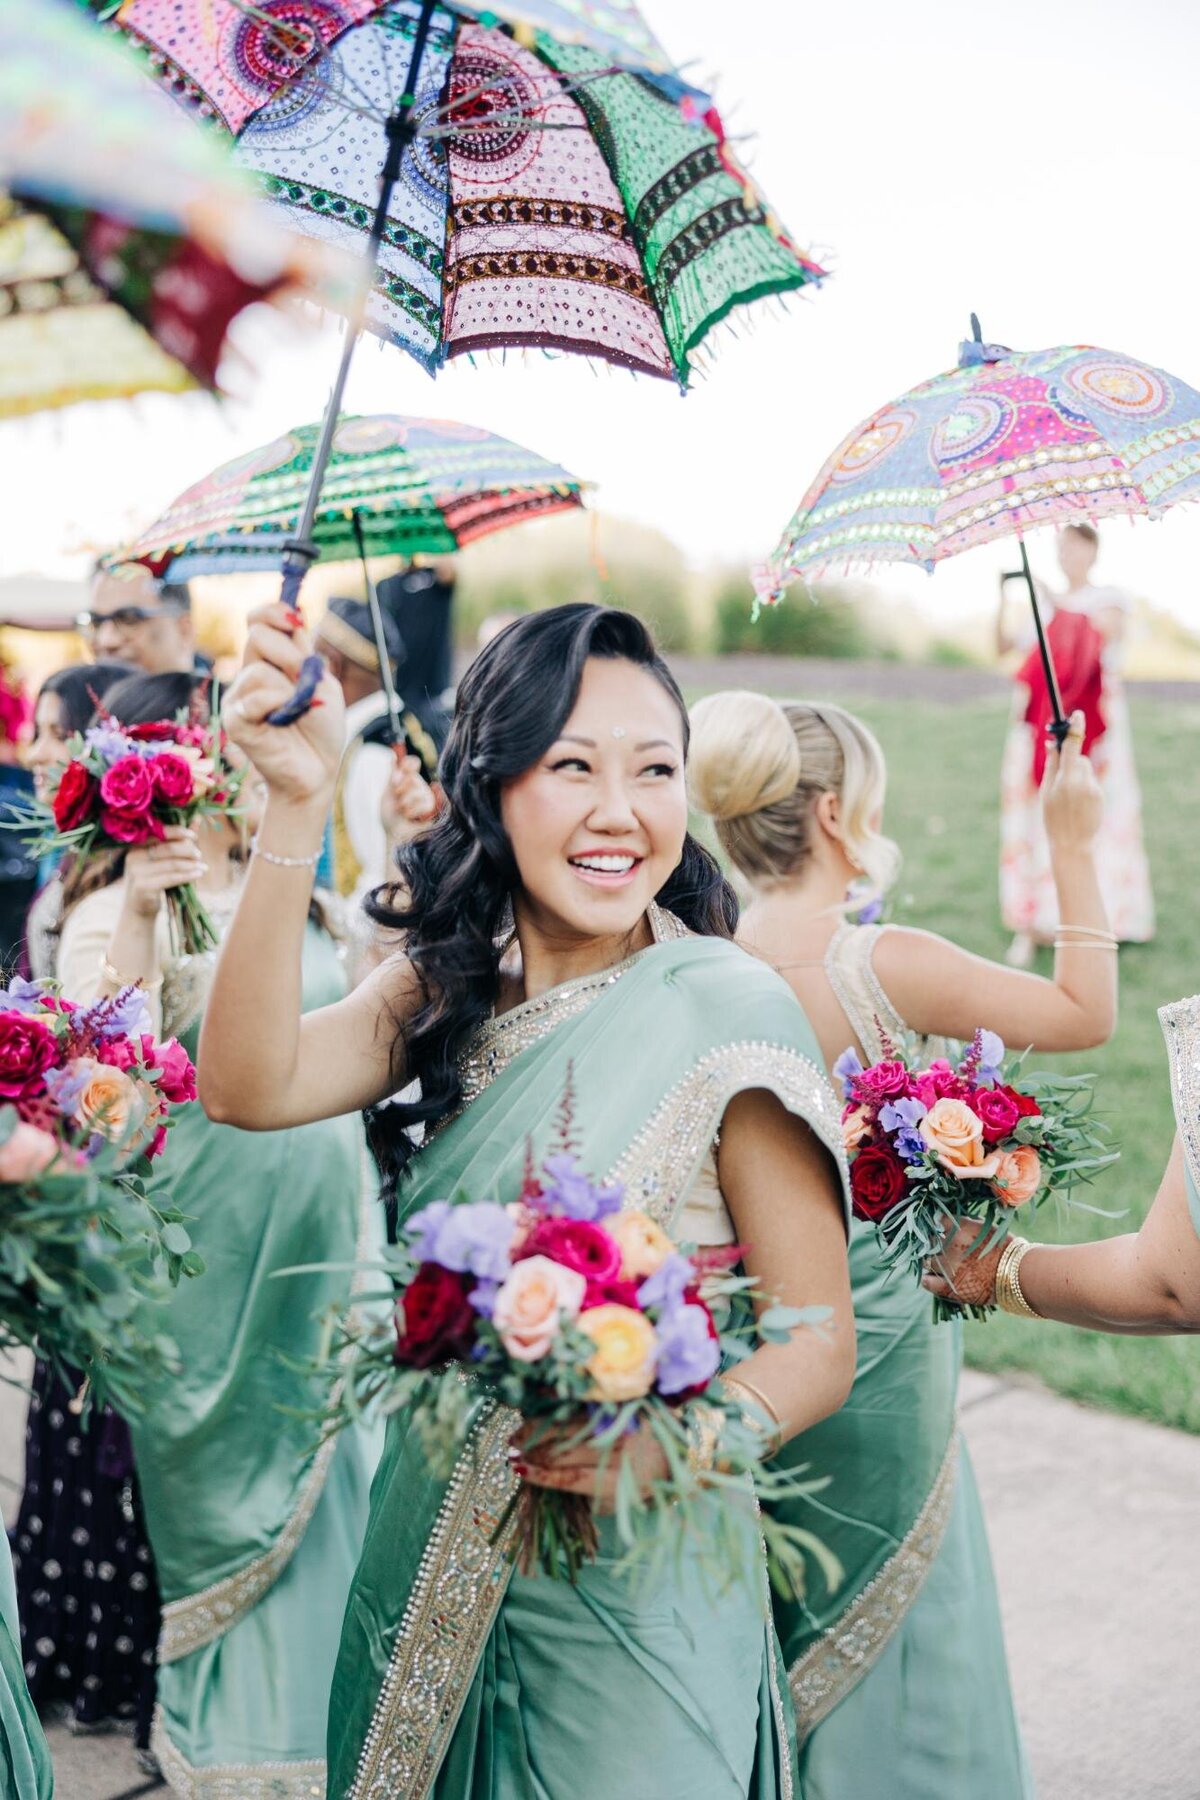 A woman in a green sari smiles while holding a bouquet, surrounded by others with colorful parasols.